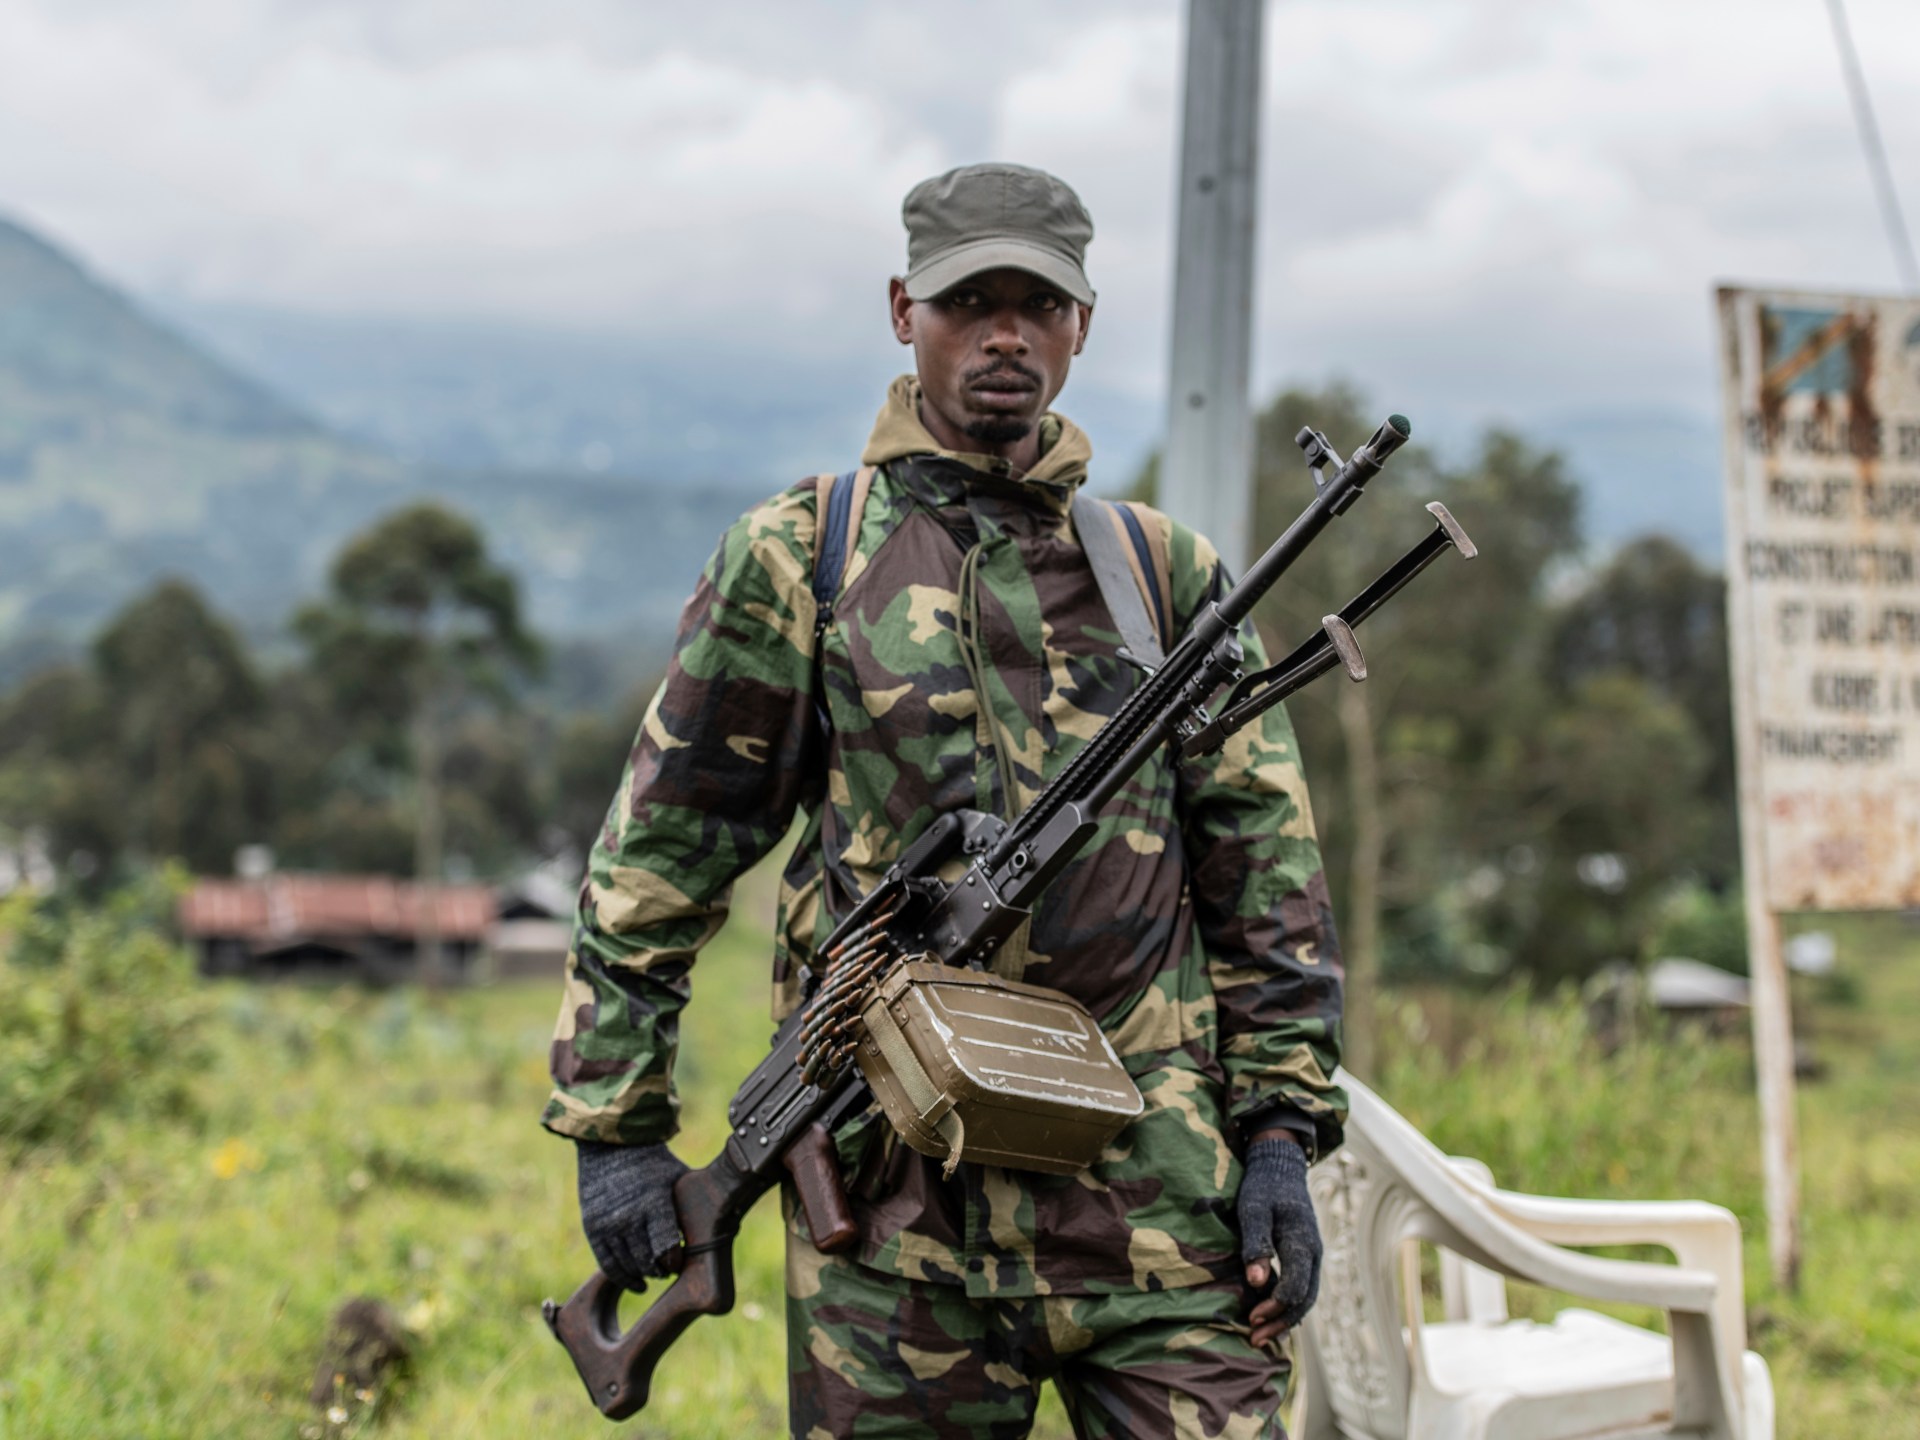 M23 rebels take control of eastern DR Congo town